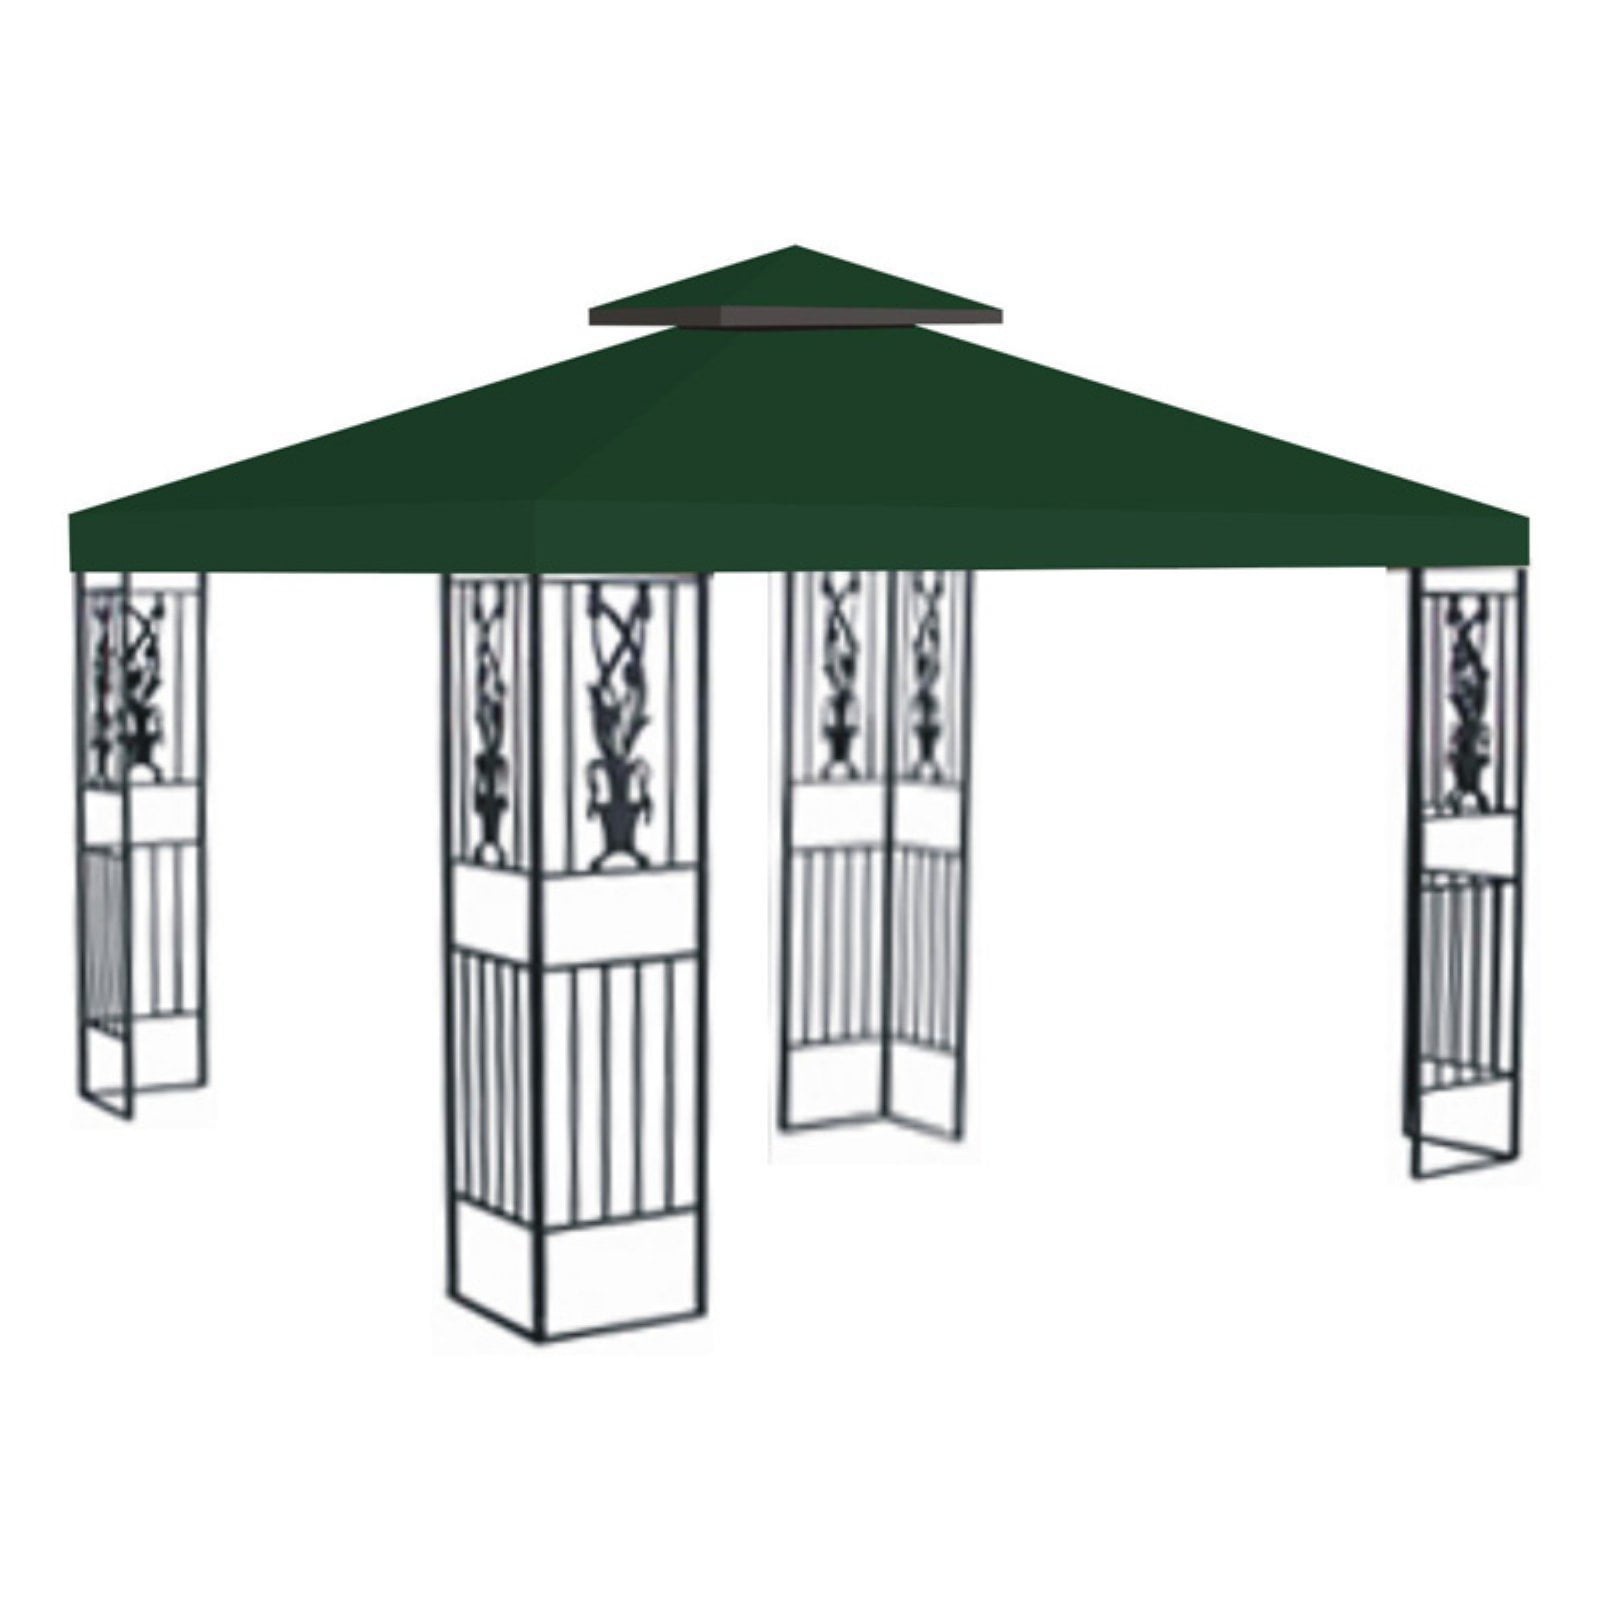 Sunrise 10 x 10 ft. Gazebo Replacement Double Tier Canopy ...